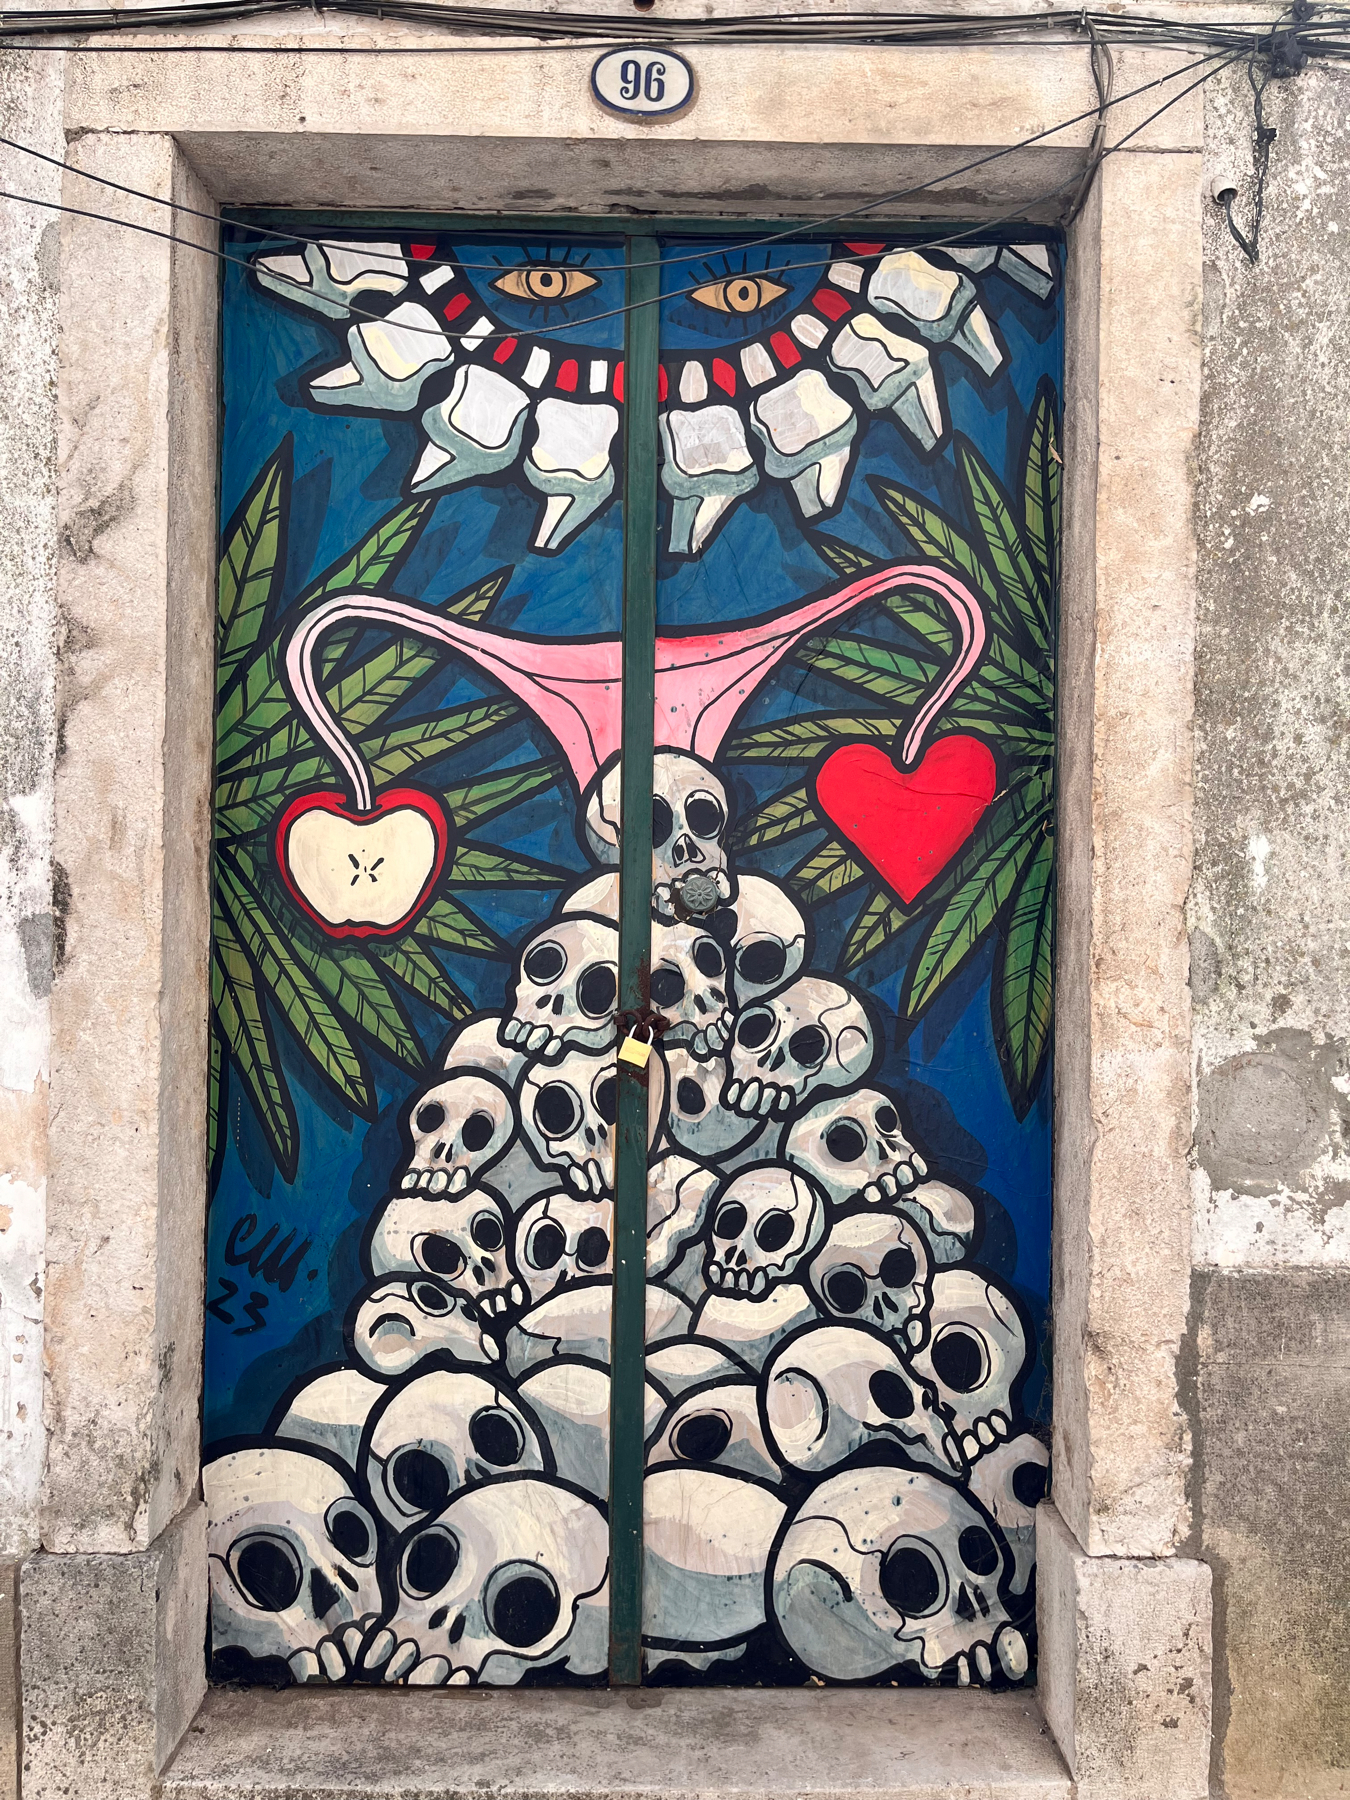 A colorful mural painted on a door depicting a tower of stylized skulls with a background of leaves and two large sets of eyes above. A pink uterus-like shape with a red heart hangs in the center between the eyes, and cut apples on either side